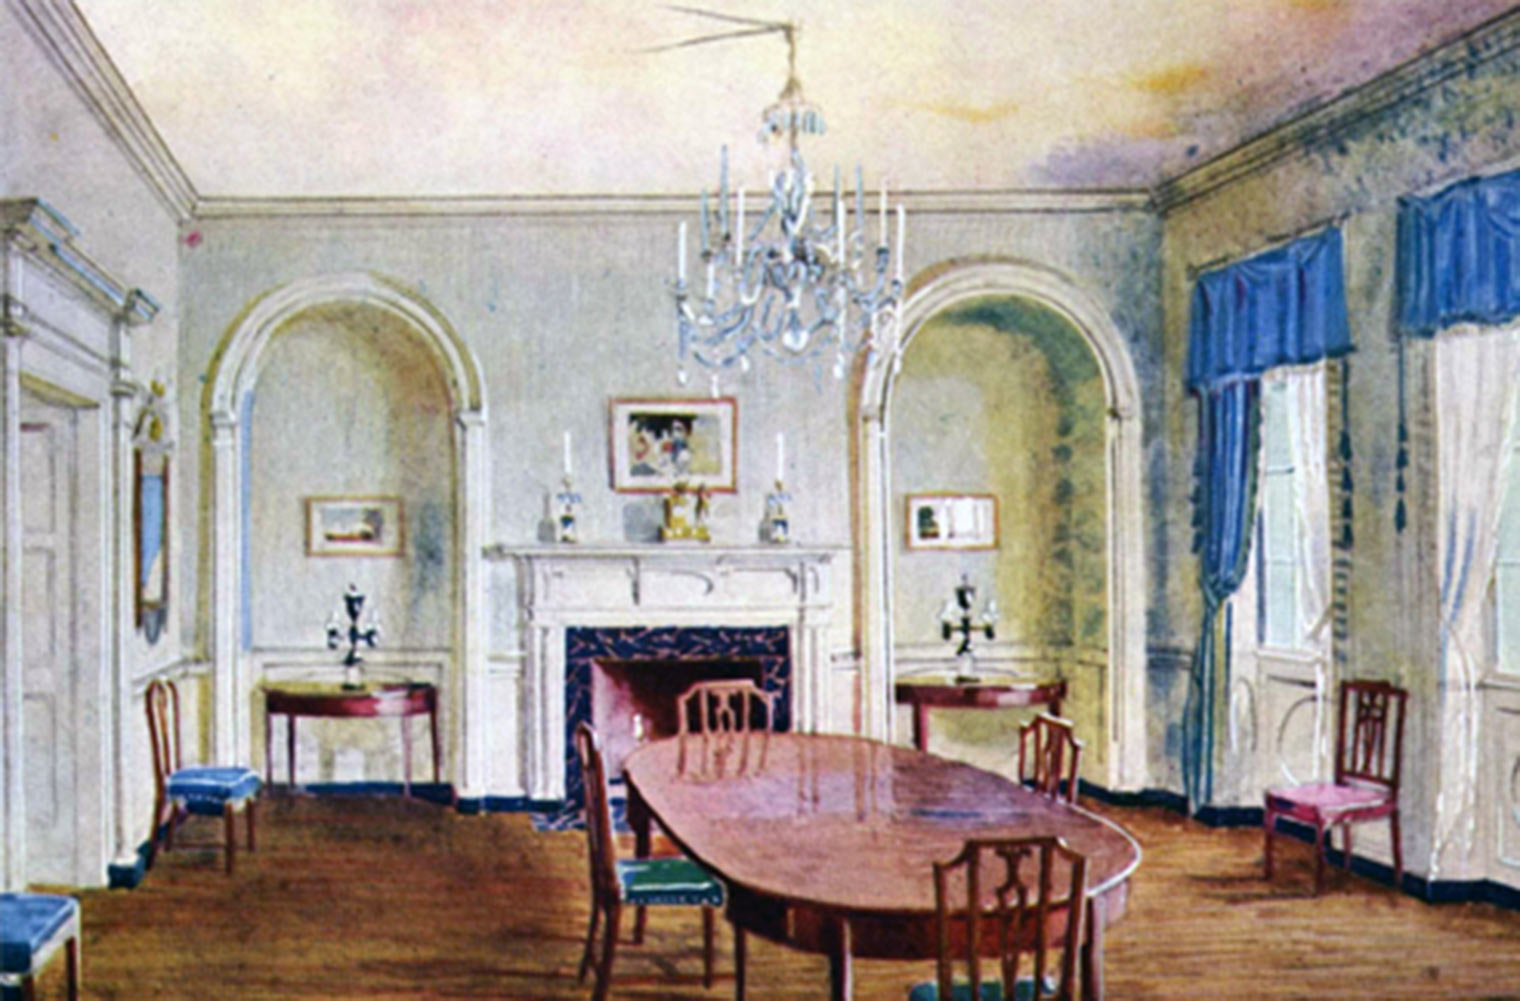 Painting of the Fireplace wall of the Baltimore Room at The Met in 1924